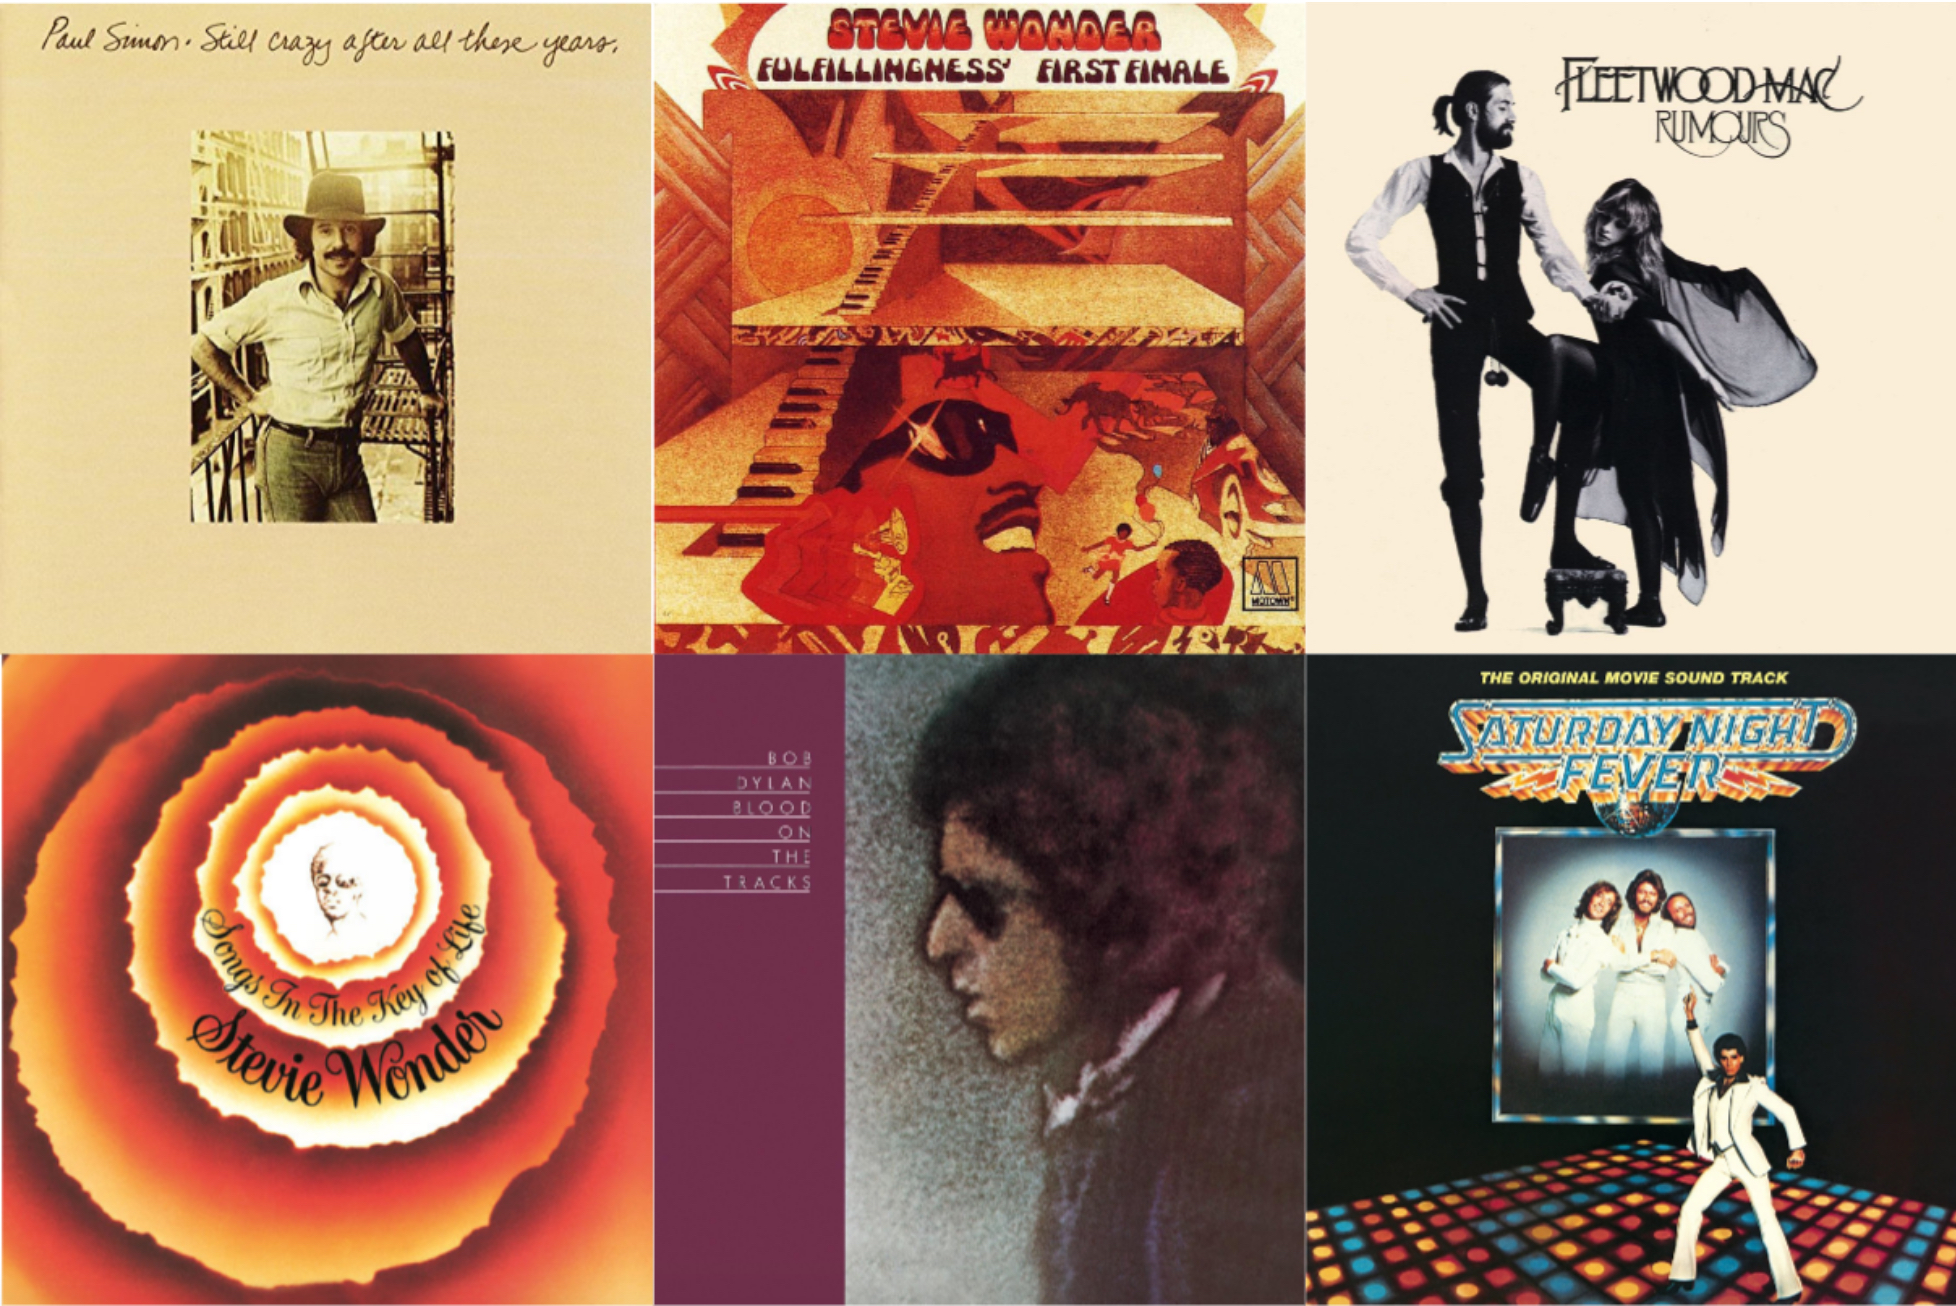 The 5 Album of the Year Grammys From 1975-1979 | Best Classic Bands